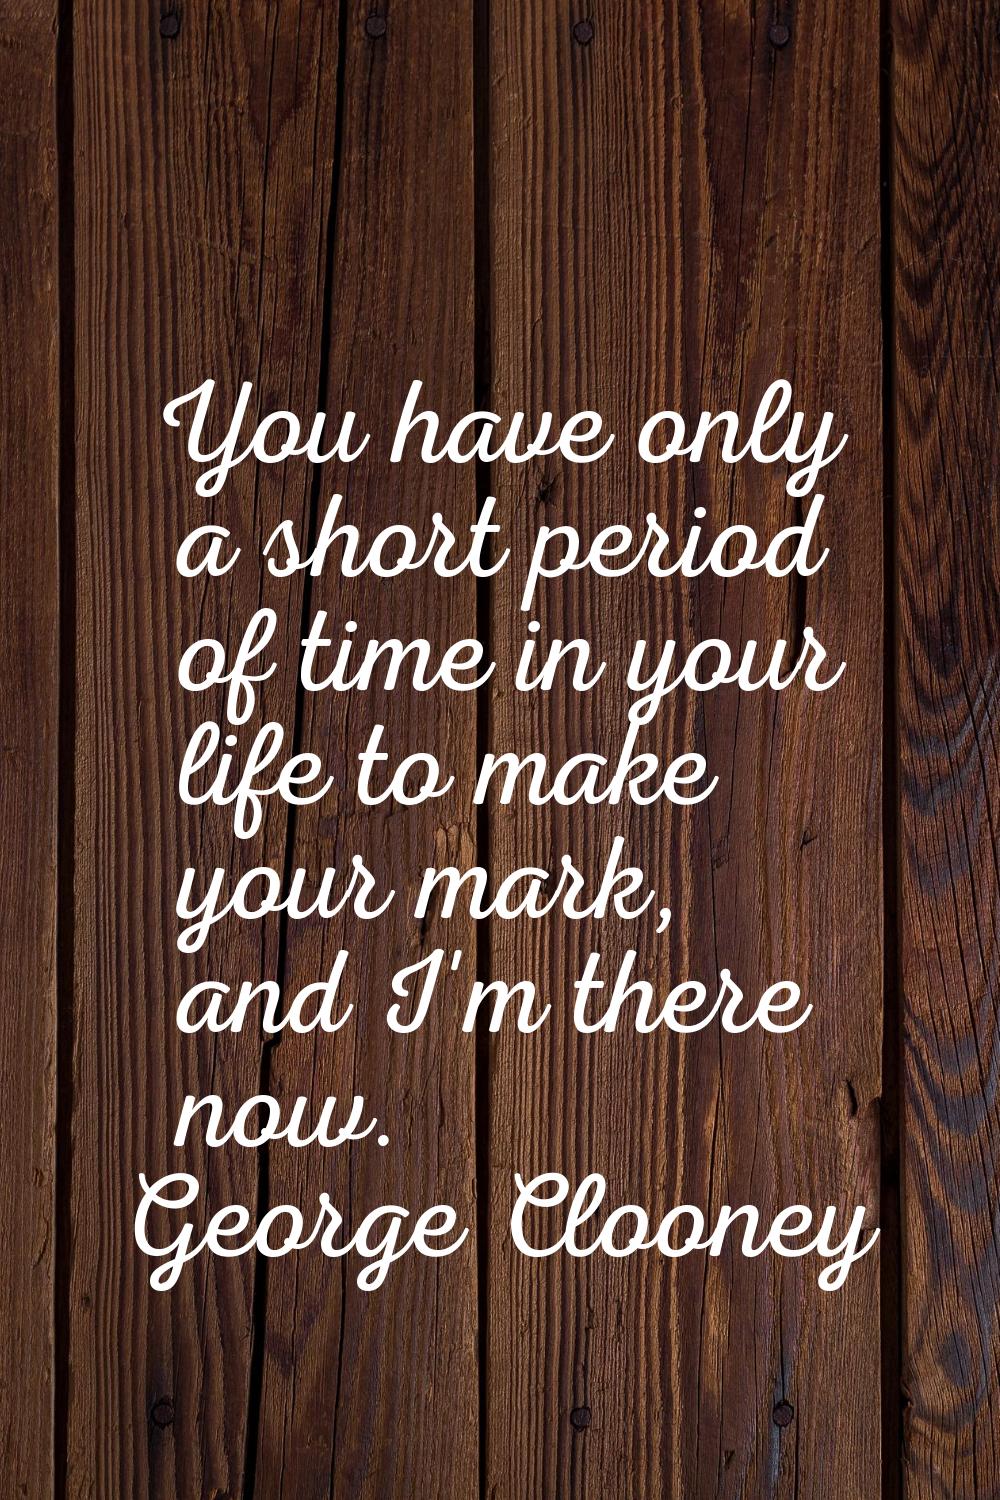 You have only a short period of time in your life to make your mark, and I'm there now.